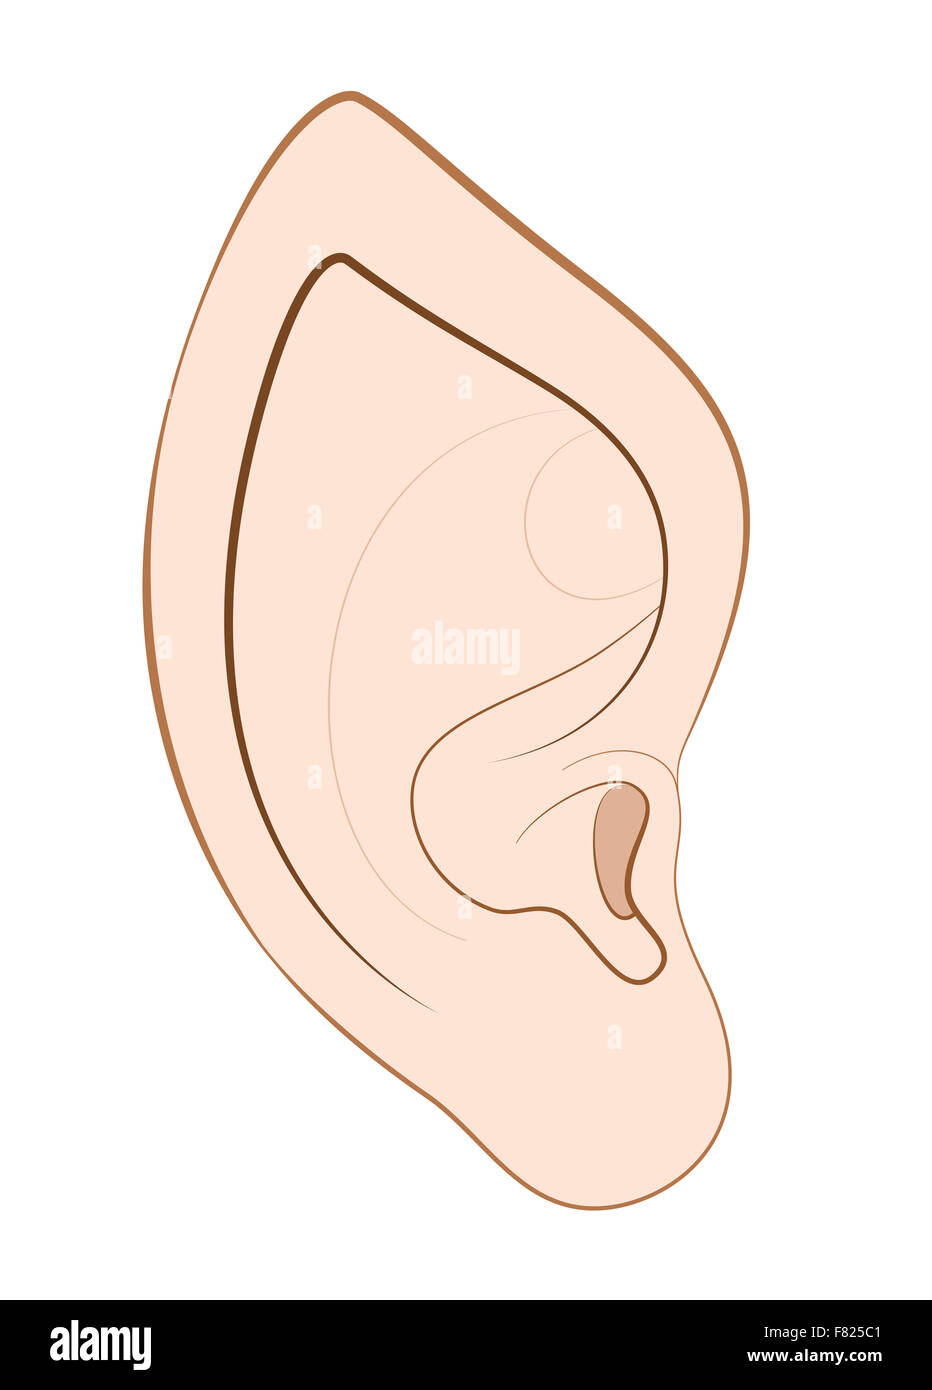 Pointed ear of an elf, fairy, vampire or other fantasy creature or animal. Stock Photo